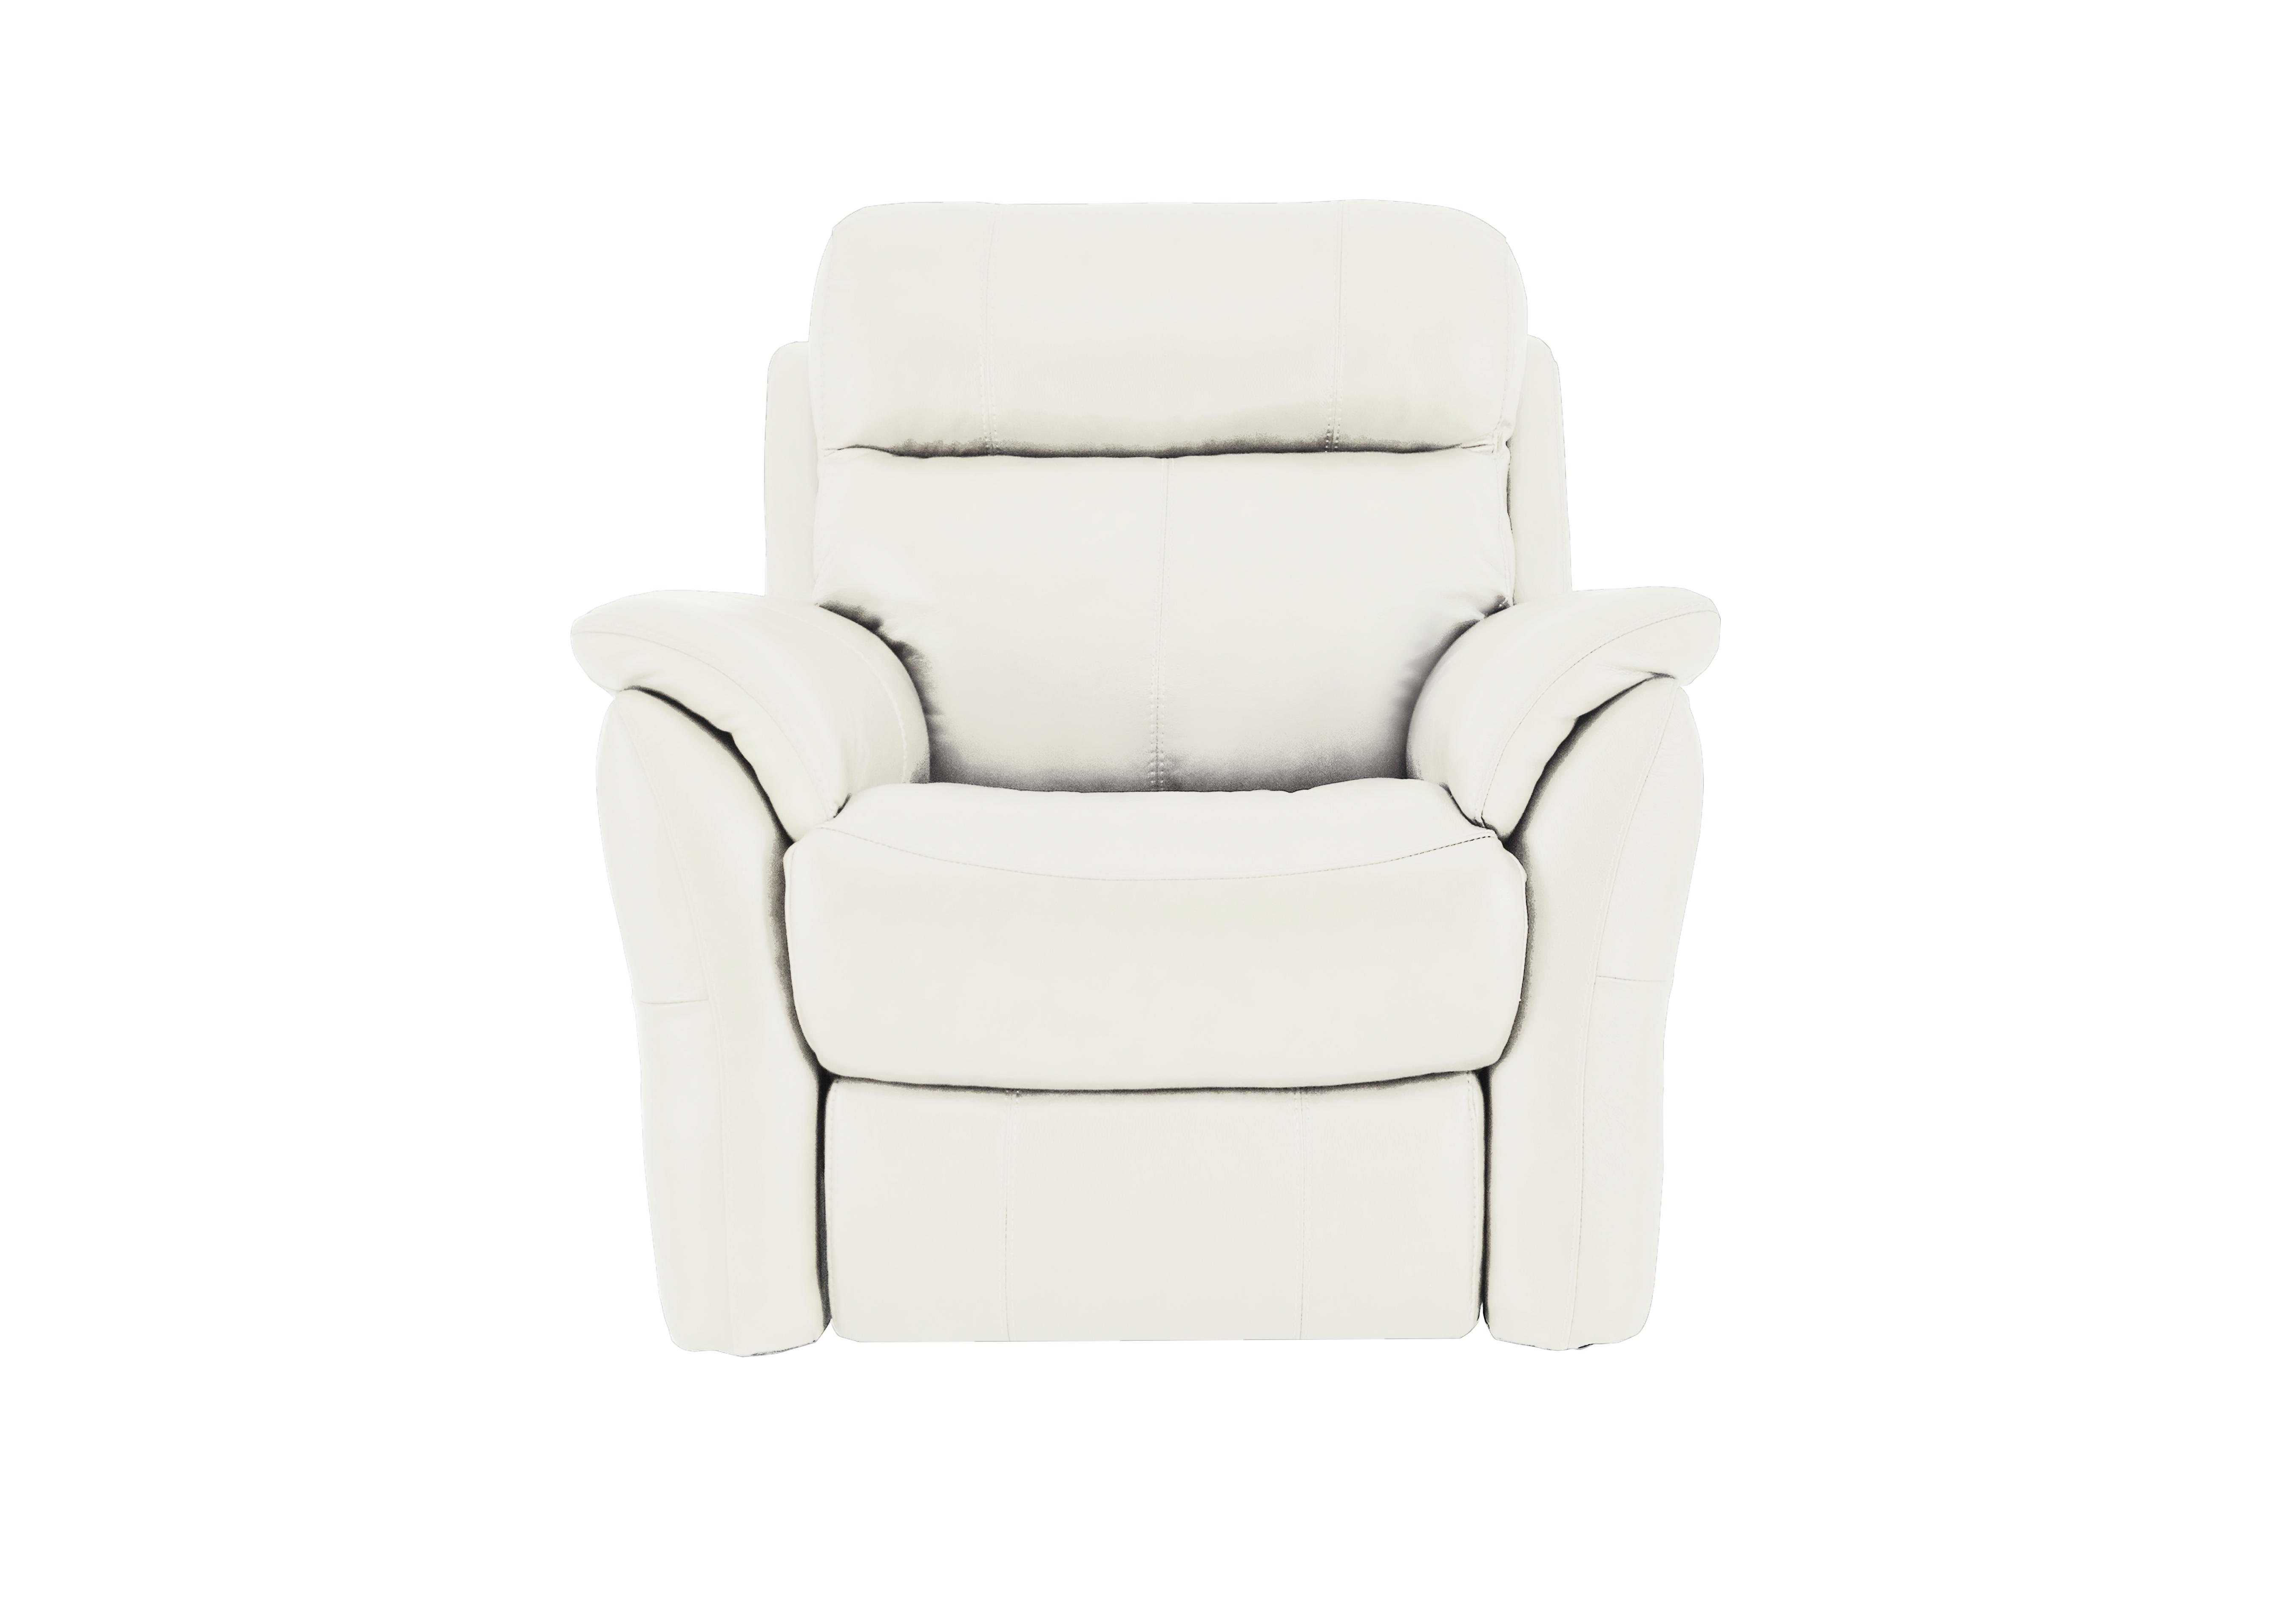 Relax Station Revive Leather Armchair in Bv-744d Star White on Furniture Village